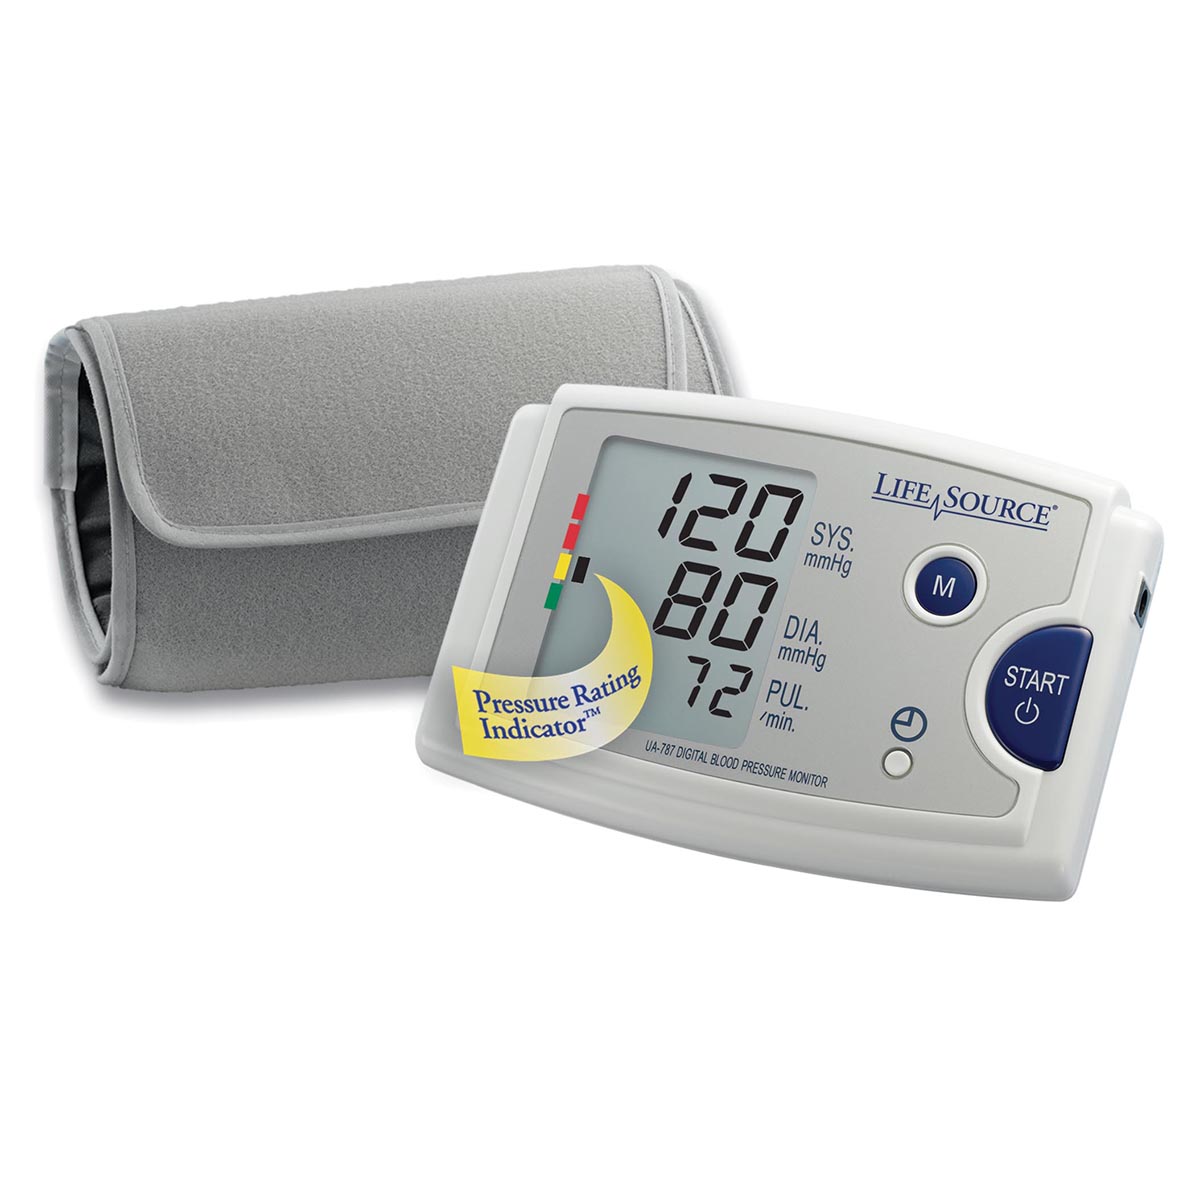 https://www.3bscientific.com/thumblibrary/W64610/W64610_01_1200_1200_Quick-Response-with-Easy-Fit-BP-Cuff-and-AC-Adapter.jpg